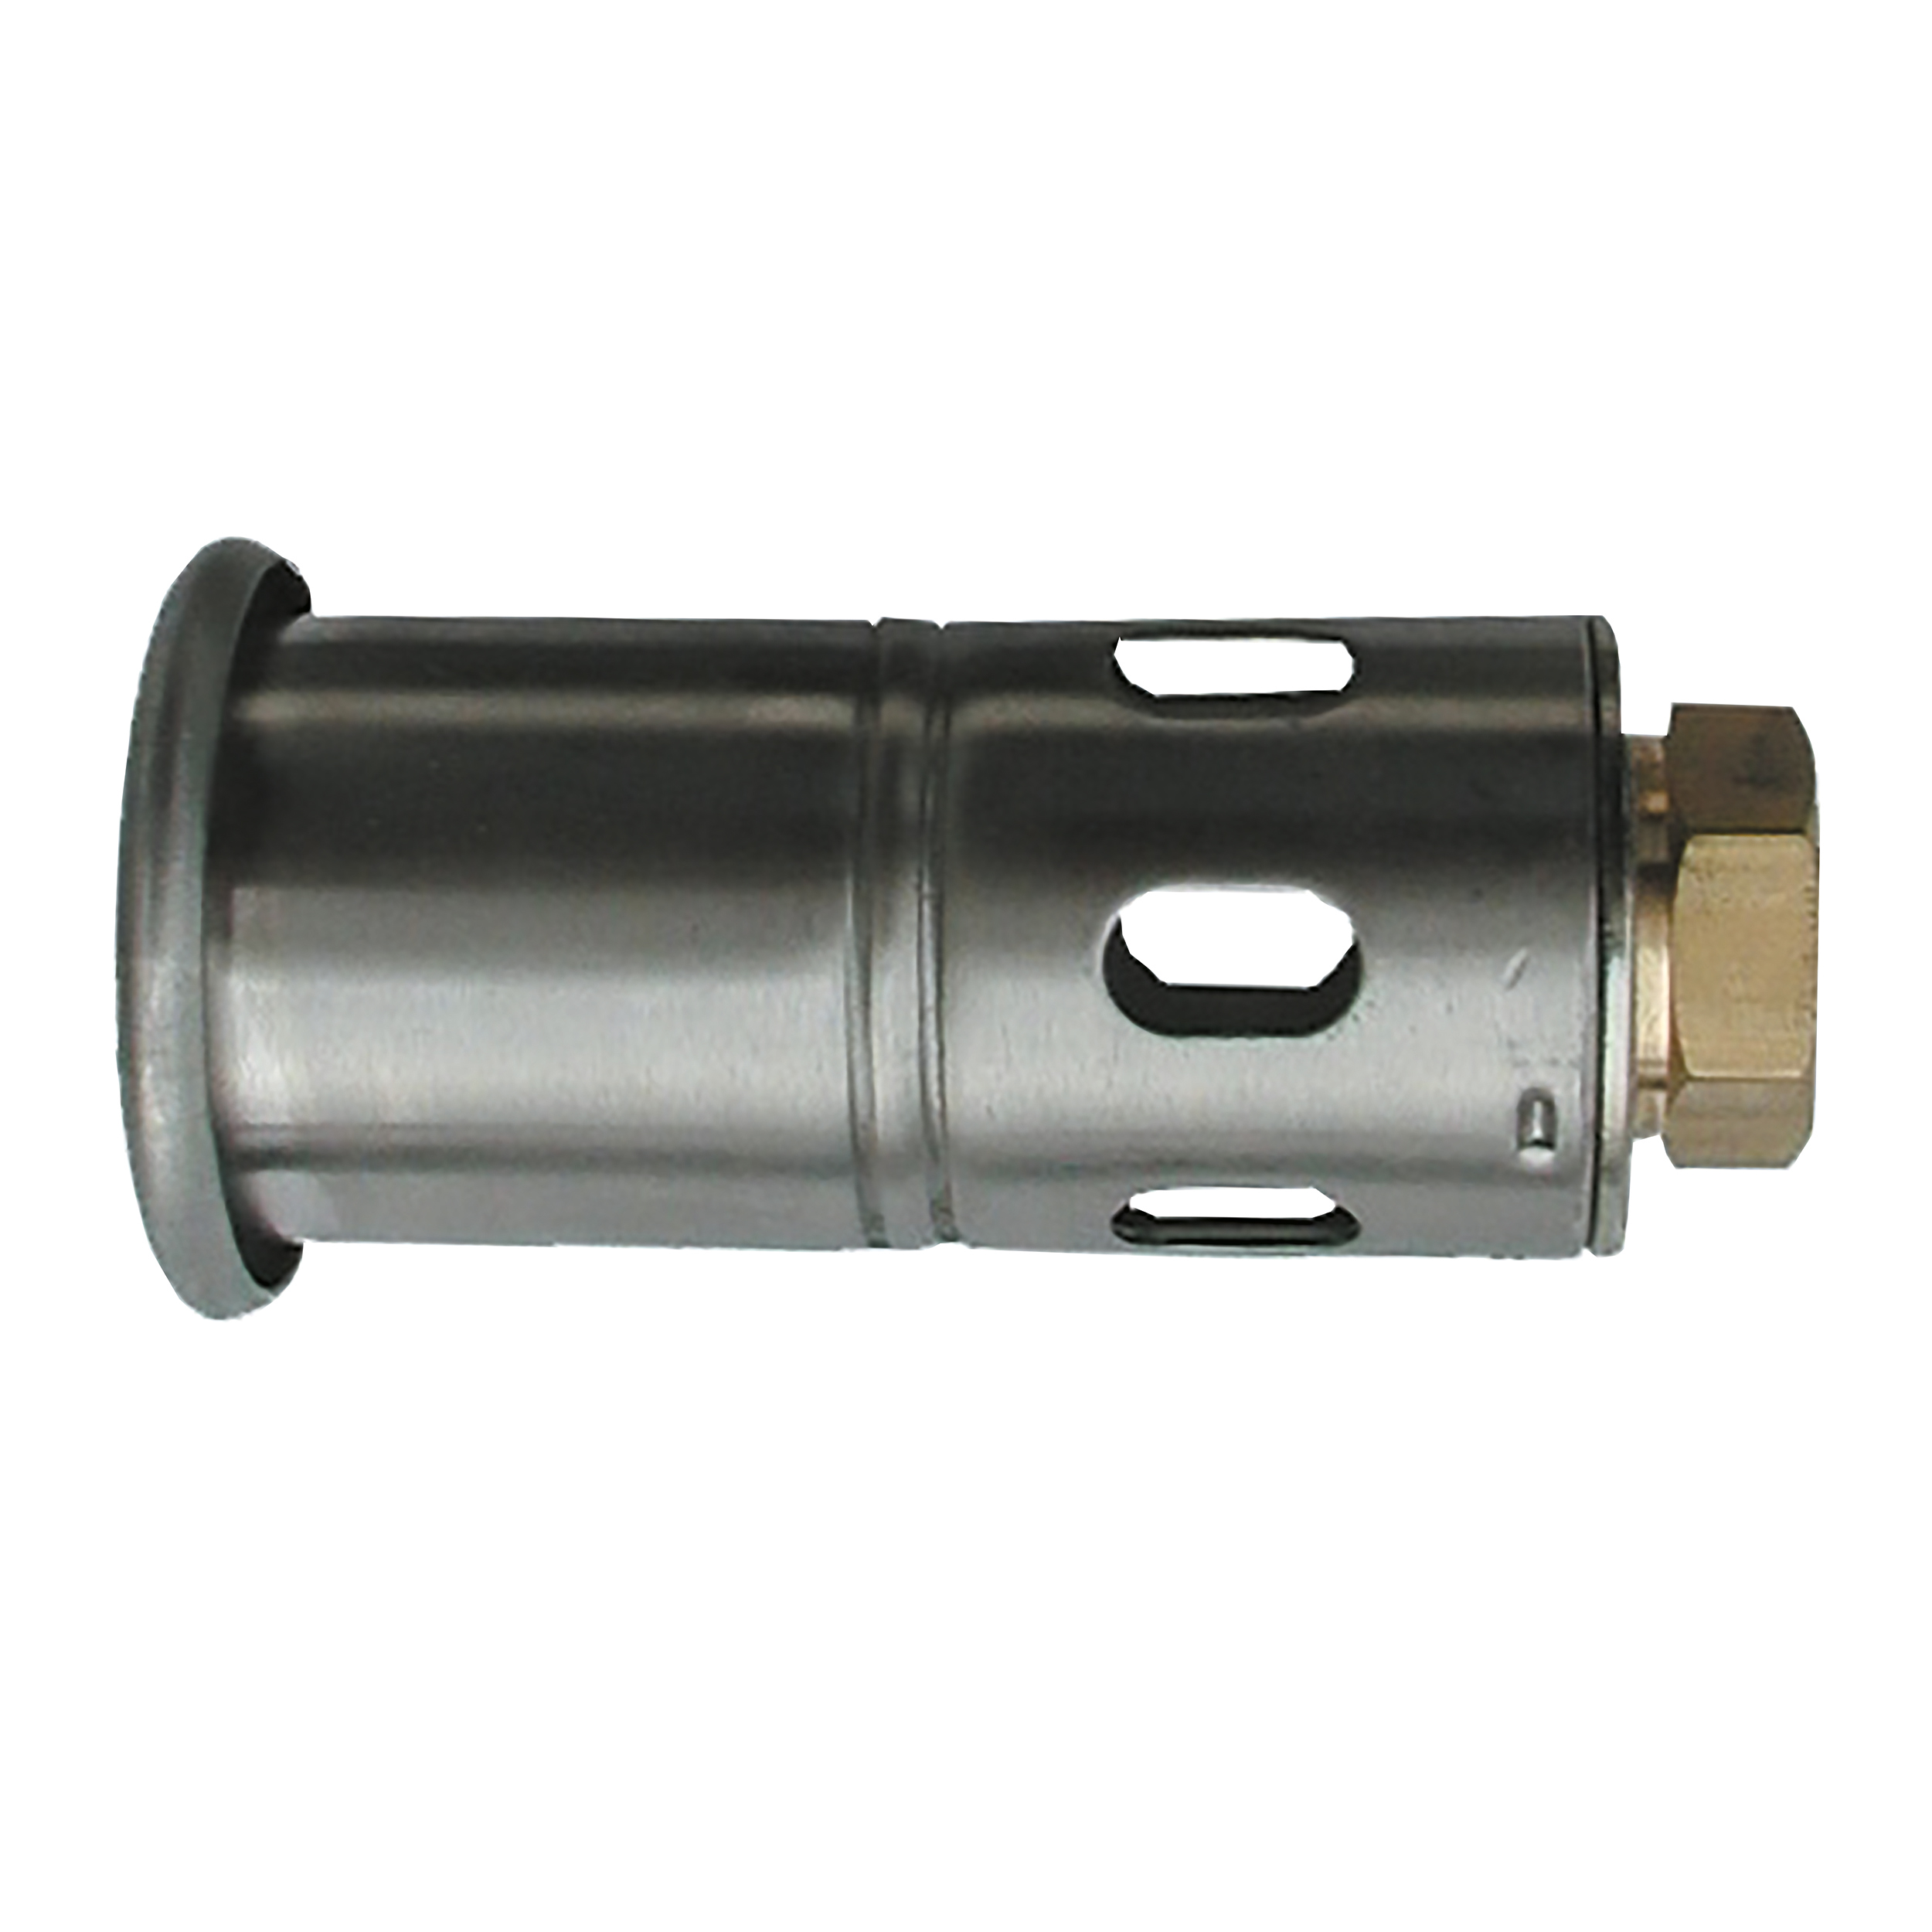 Burner head, Ø35, stainless steel, connection thread: M20 × 1 female, practical support is necessary